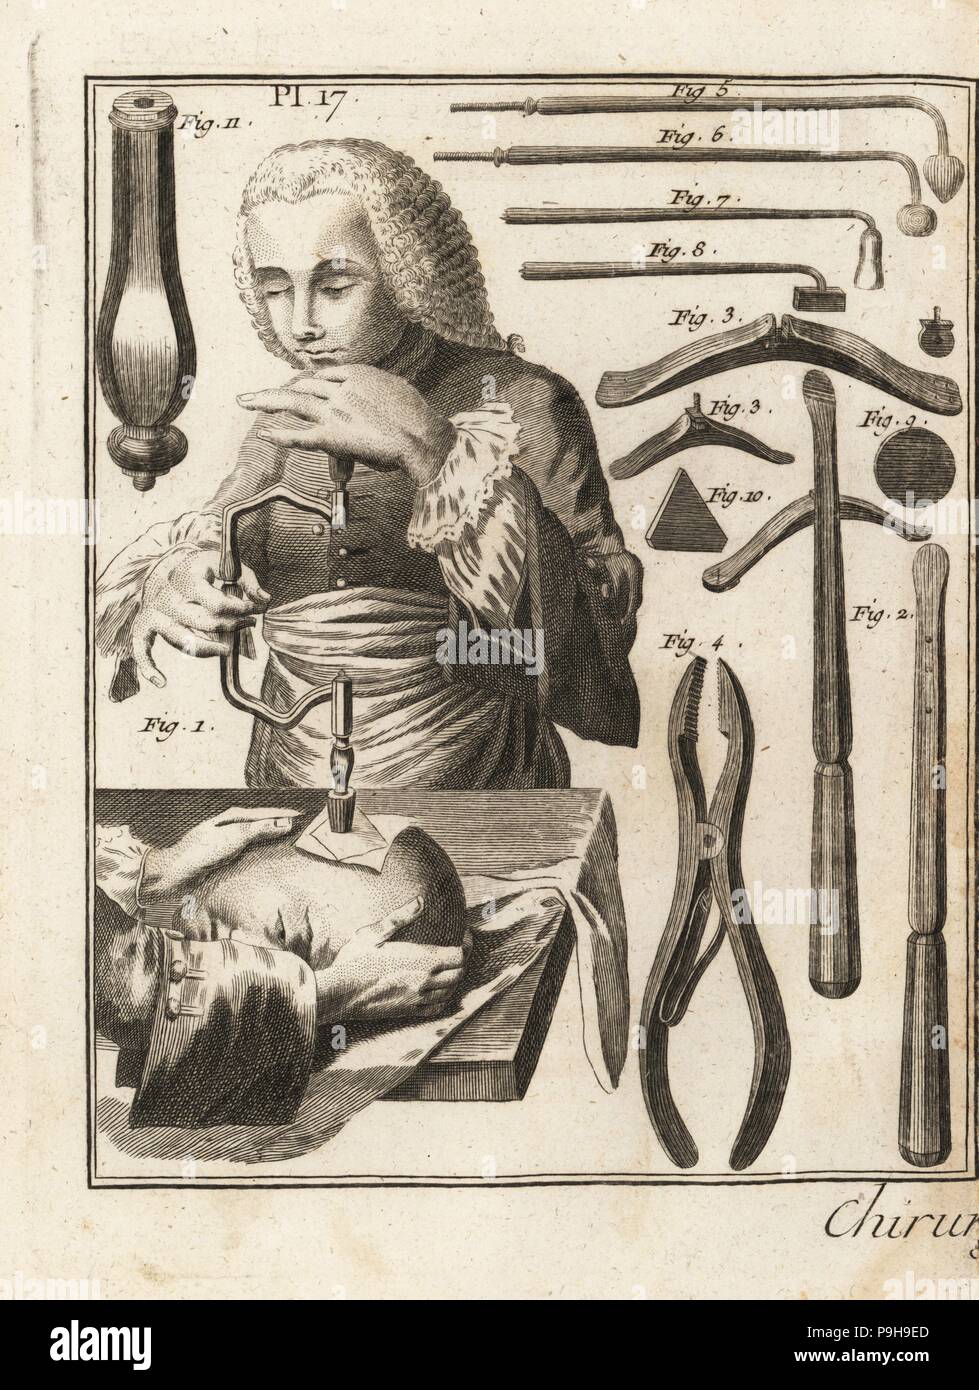 18th century surgeon performing a trepanning operation on a man's head,  with various surgical equipment: Jean Louis Petit's lever 2, trestle 3,  Valet's pincers 4, cauterizers 5-8, round plaque 9, triangular plaque